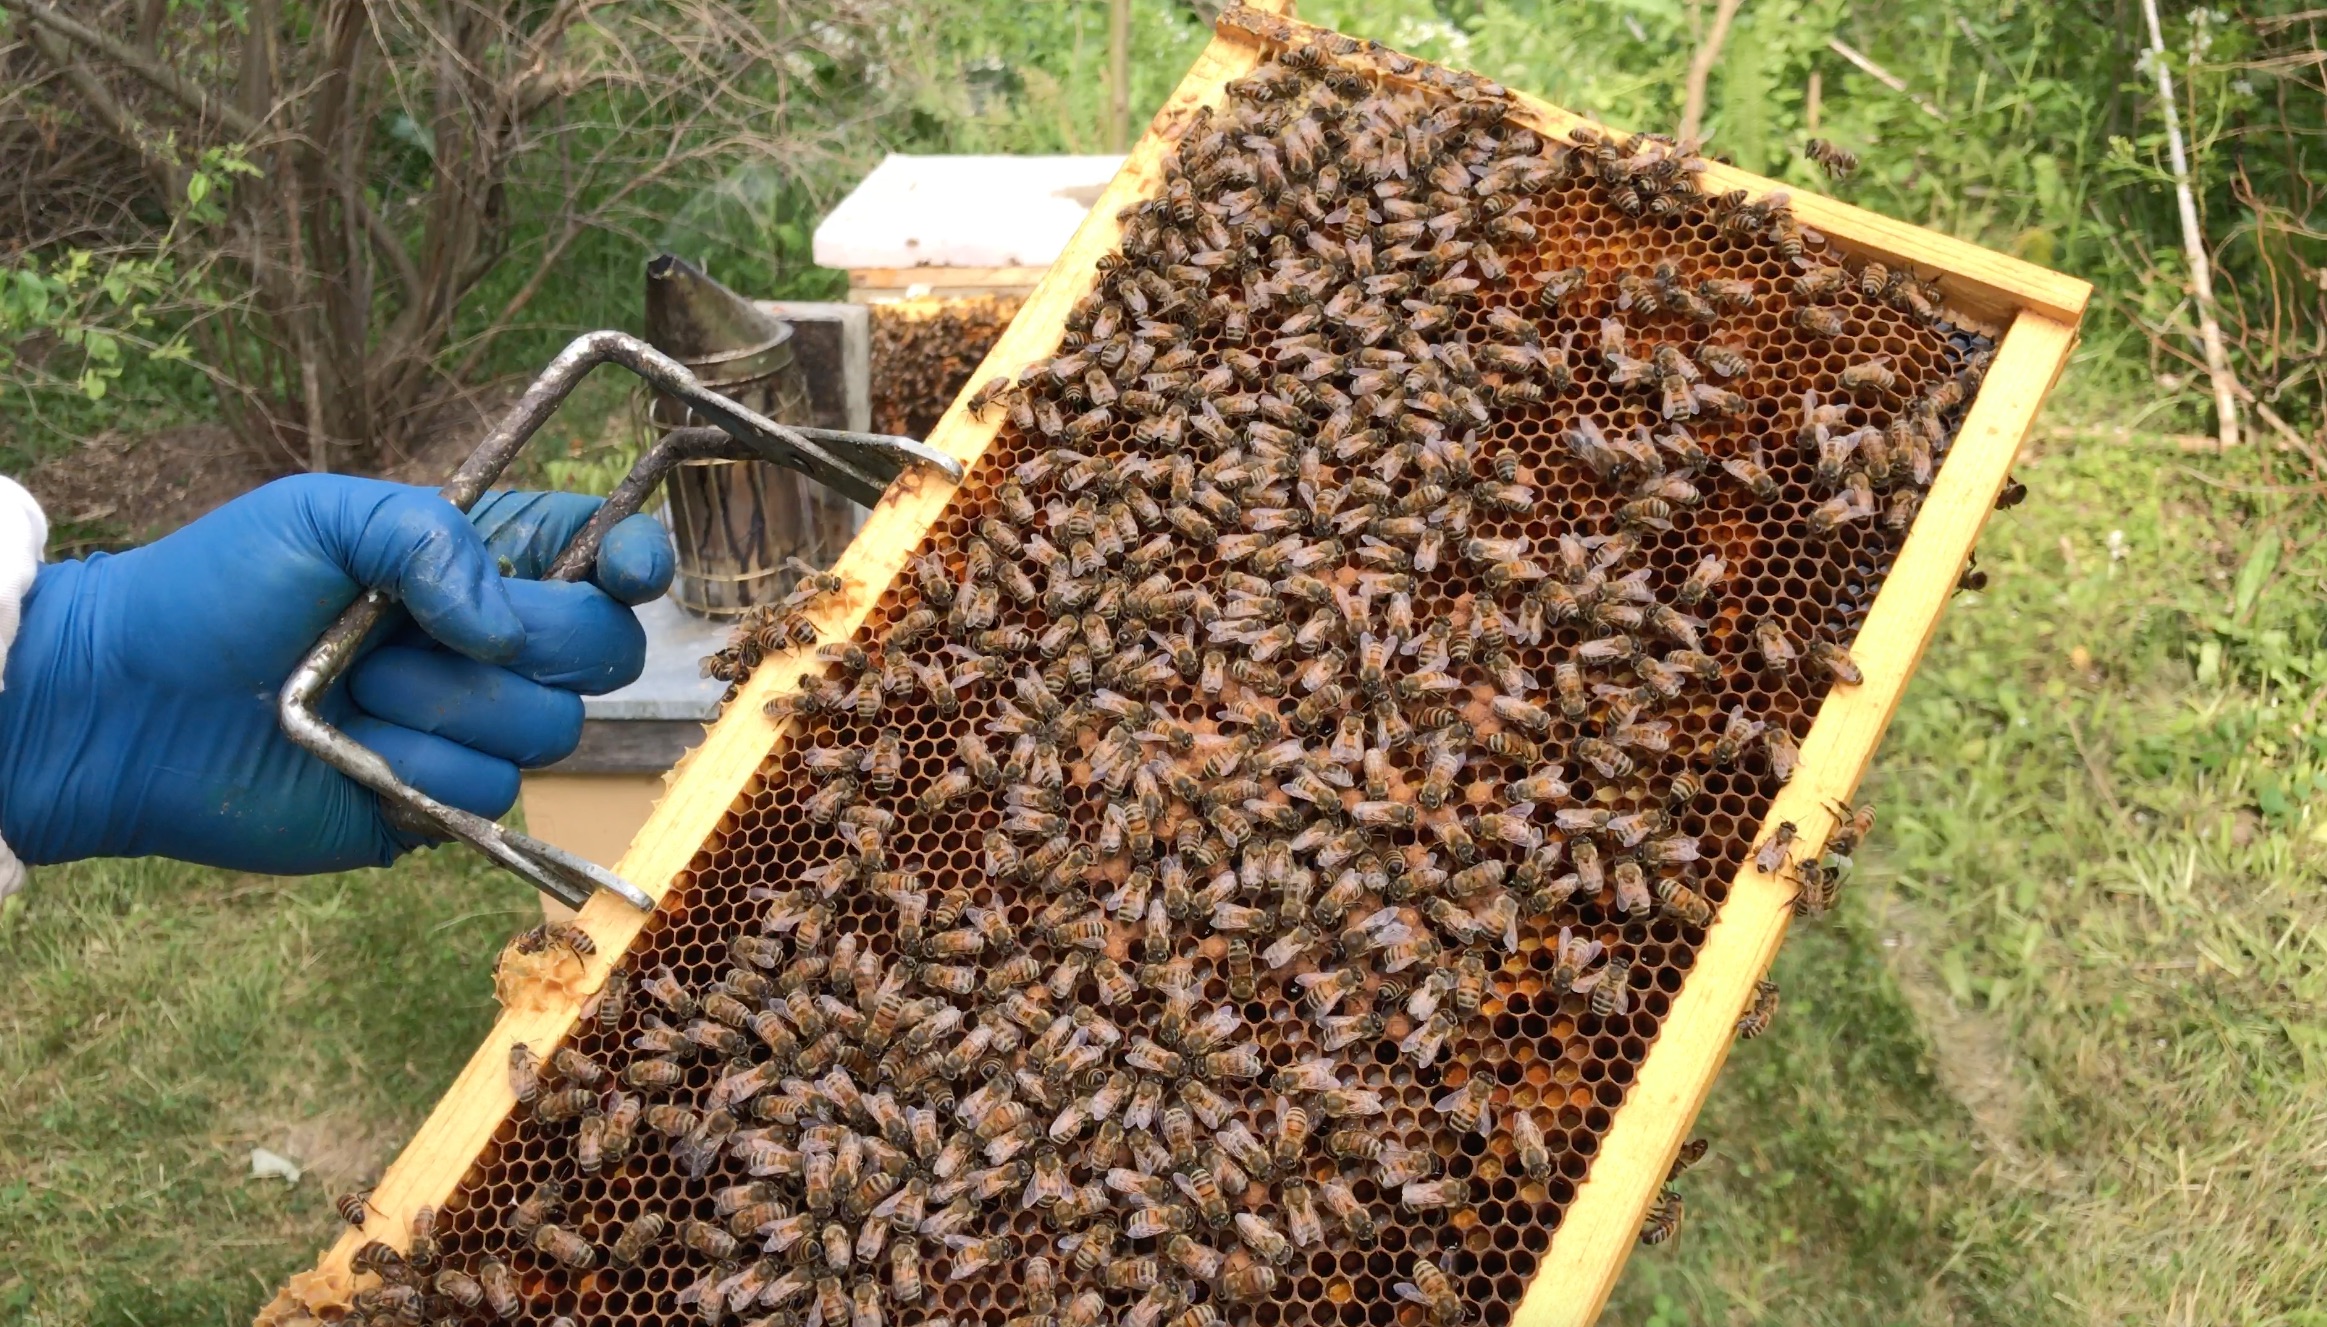 A group of bees.